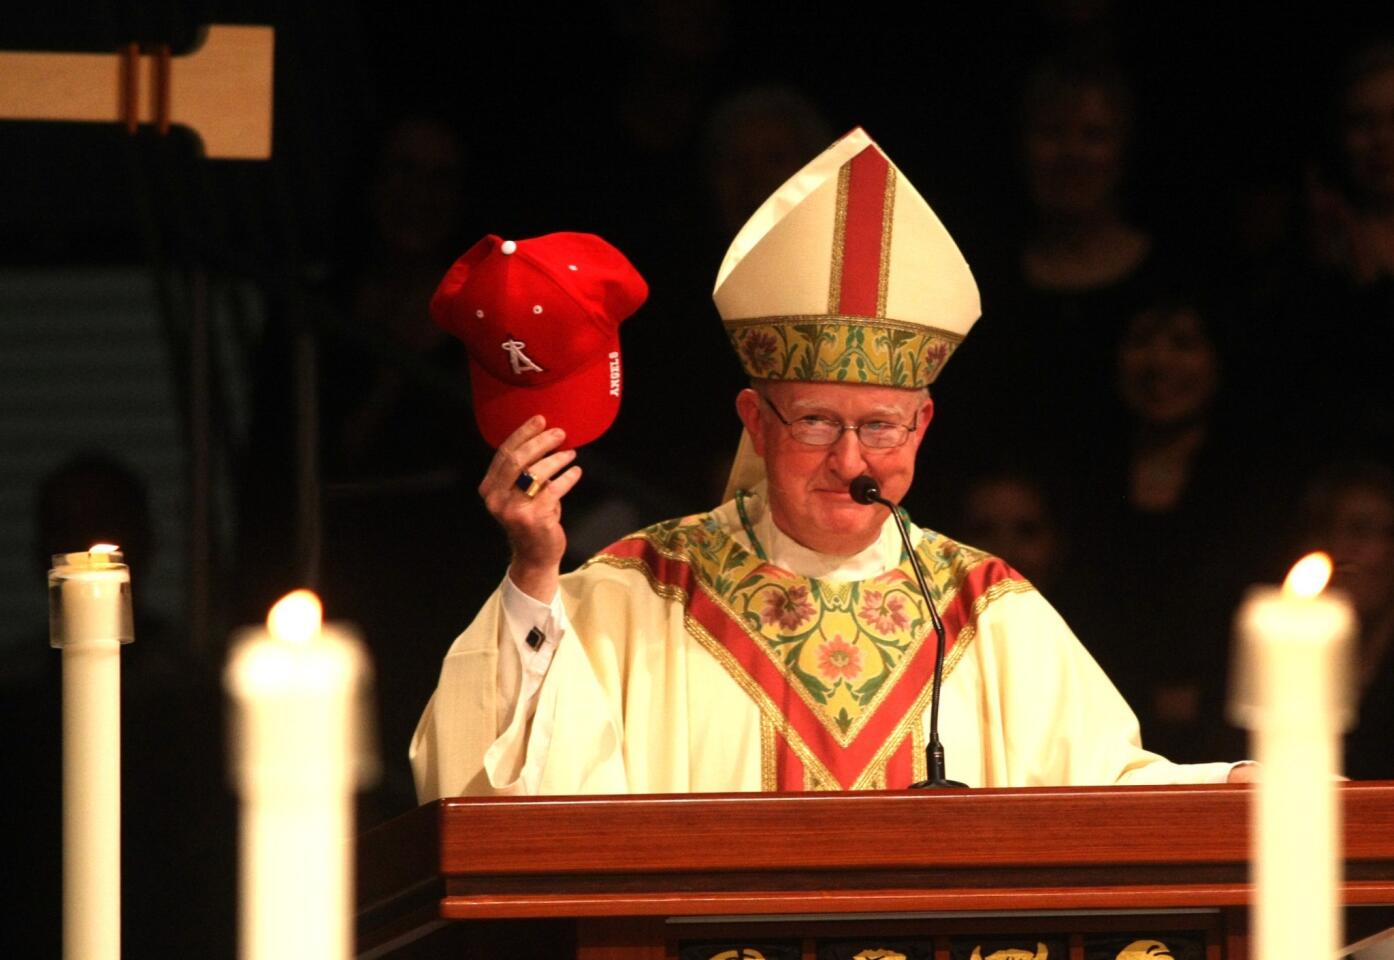 Bishop Kevin W. Vann, 61, holds up a Los Angeles Angels of Anaheim baseball cap during his speech to congregants at his installation as the new bishop of the Diocese of Orange.